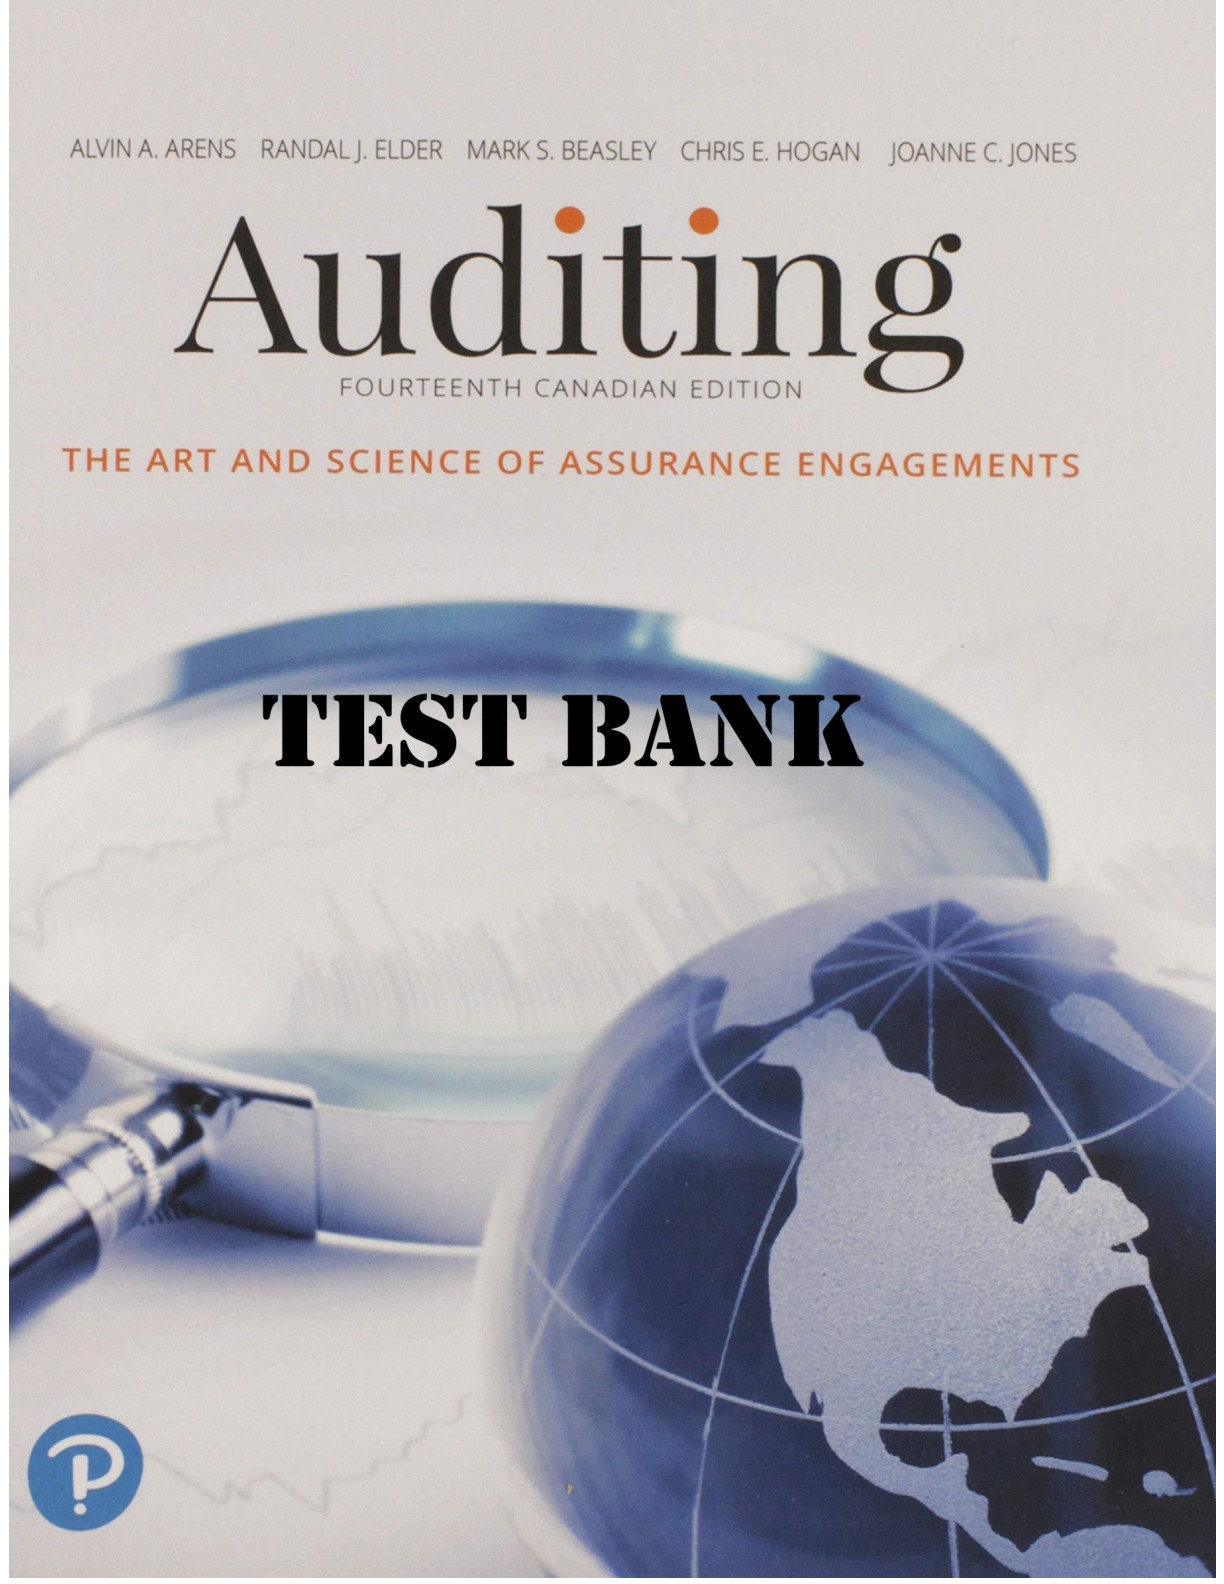 Auditing The Art and Science of Assurance Engagements, Fourteenth Canadian Edition